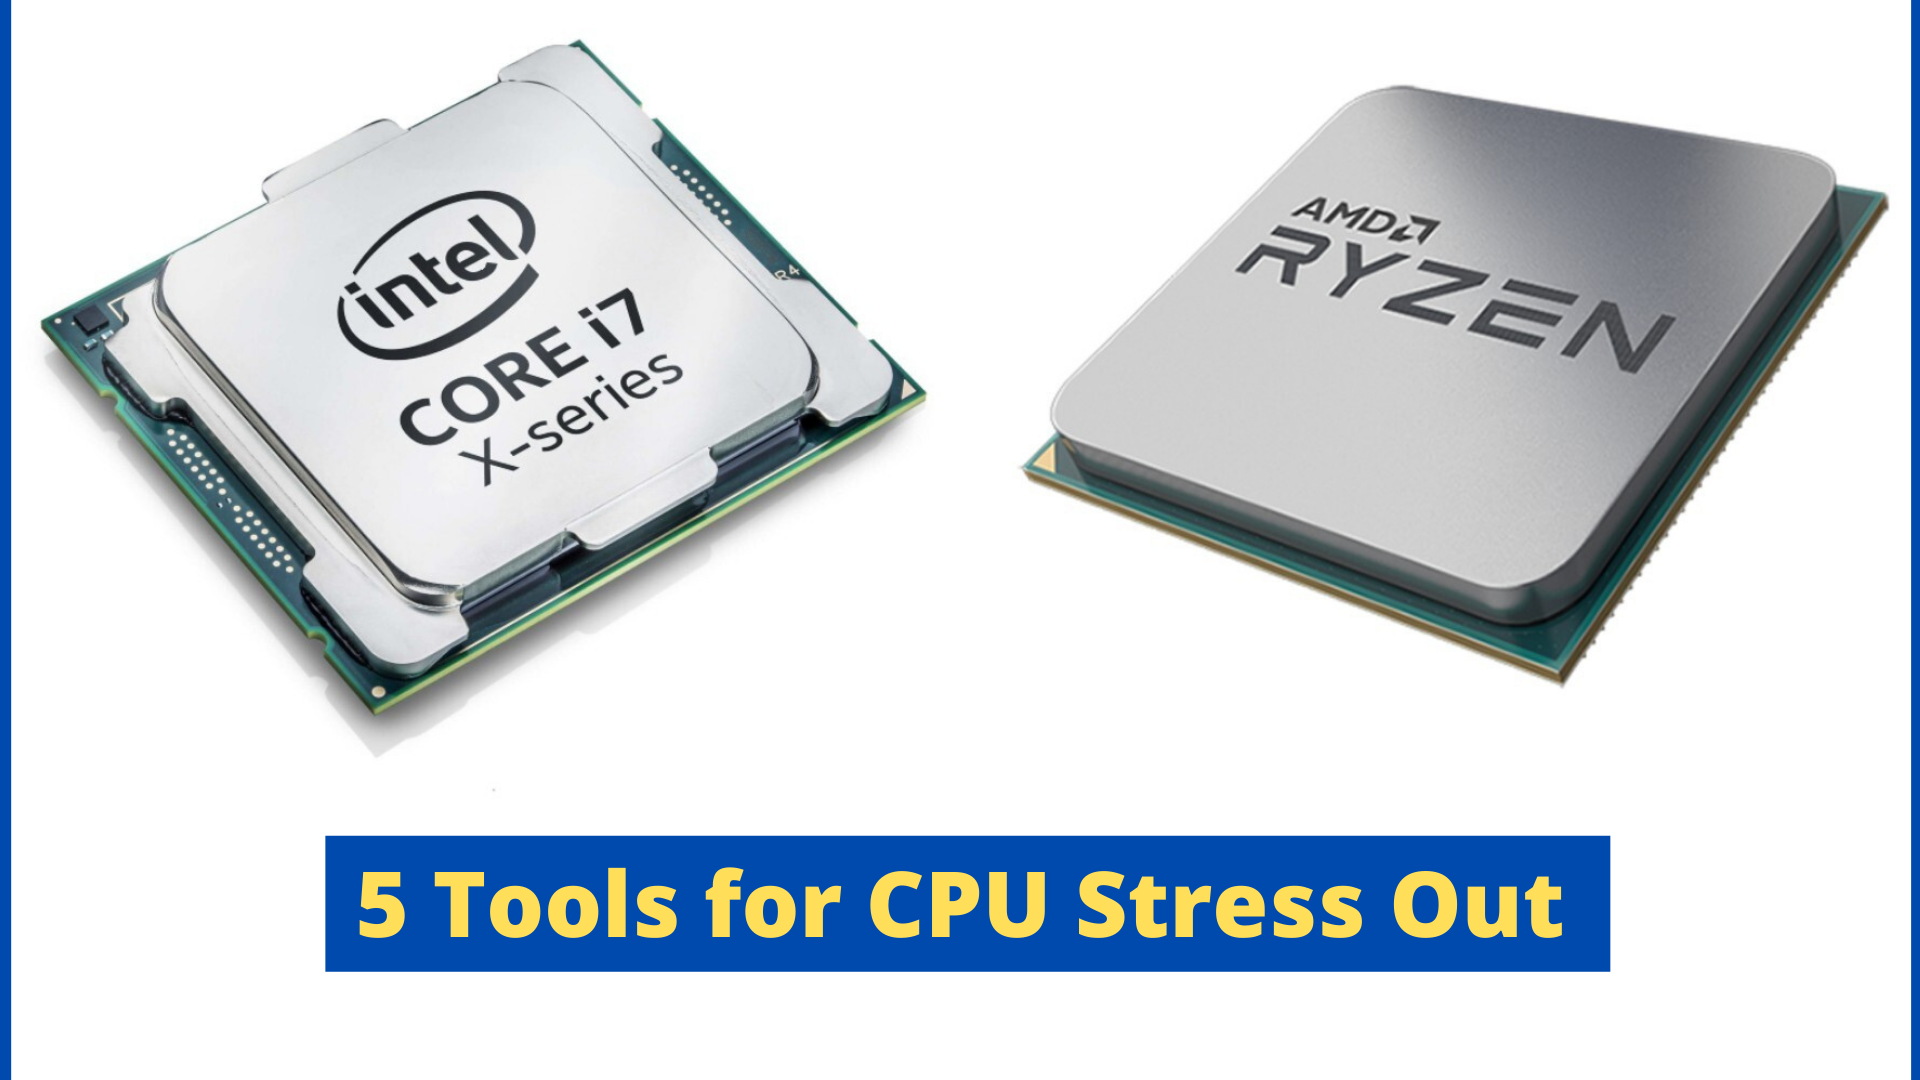 5 Tools for CPU Stress Out